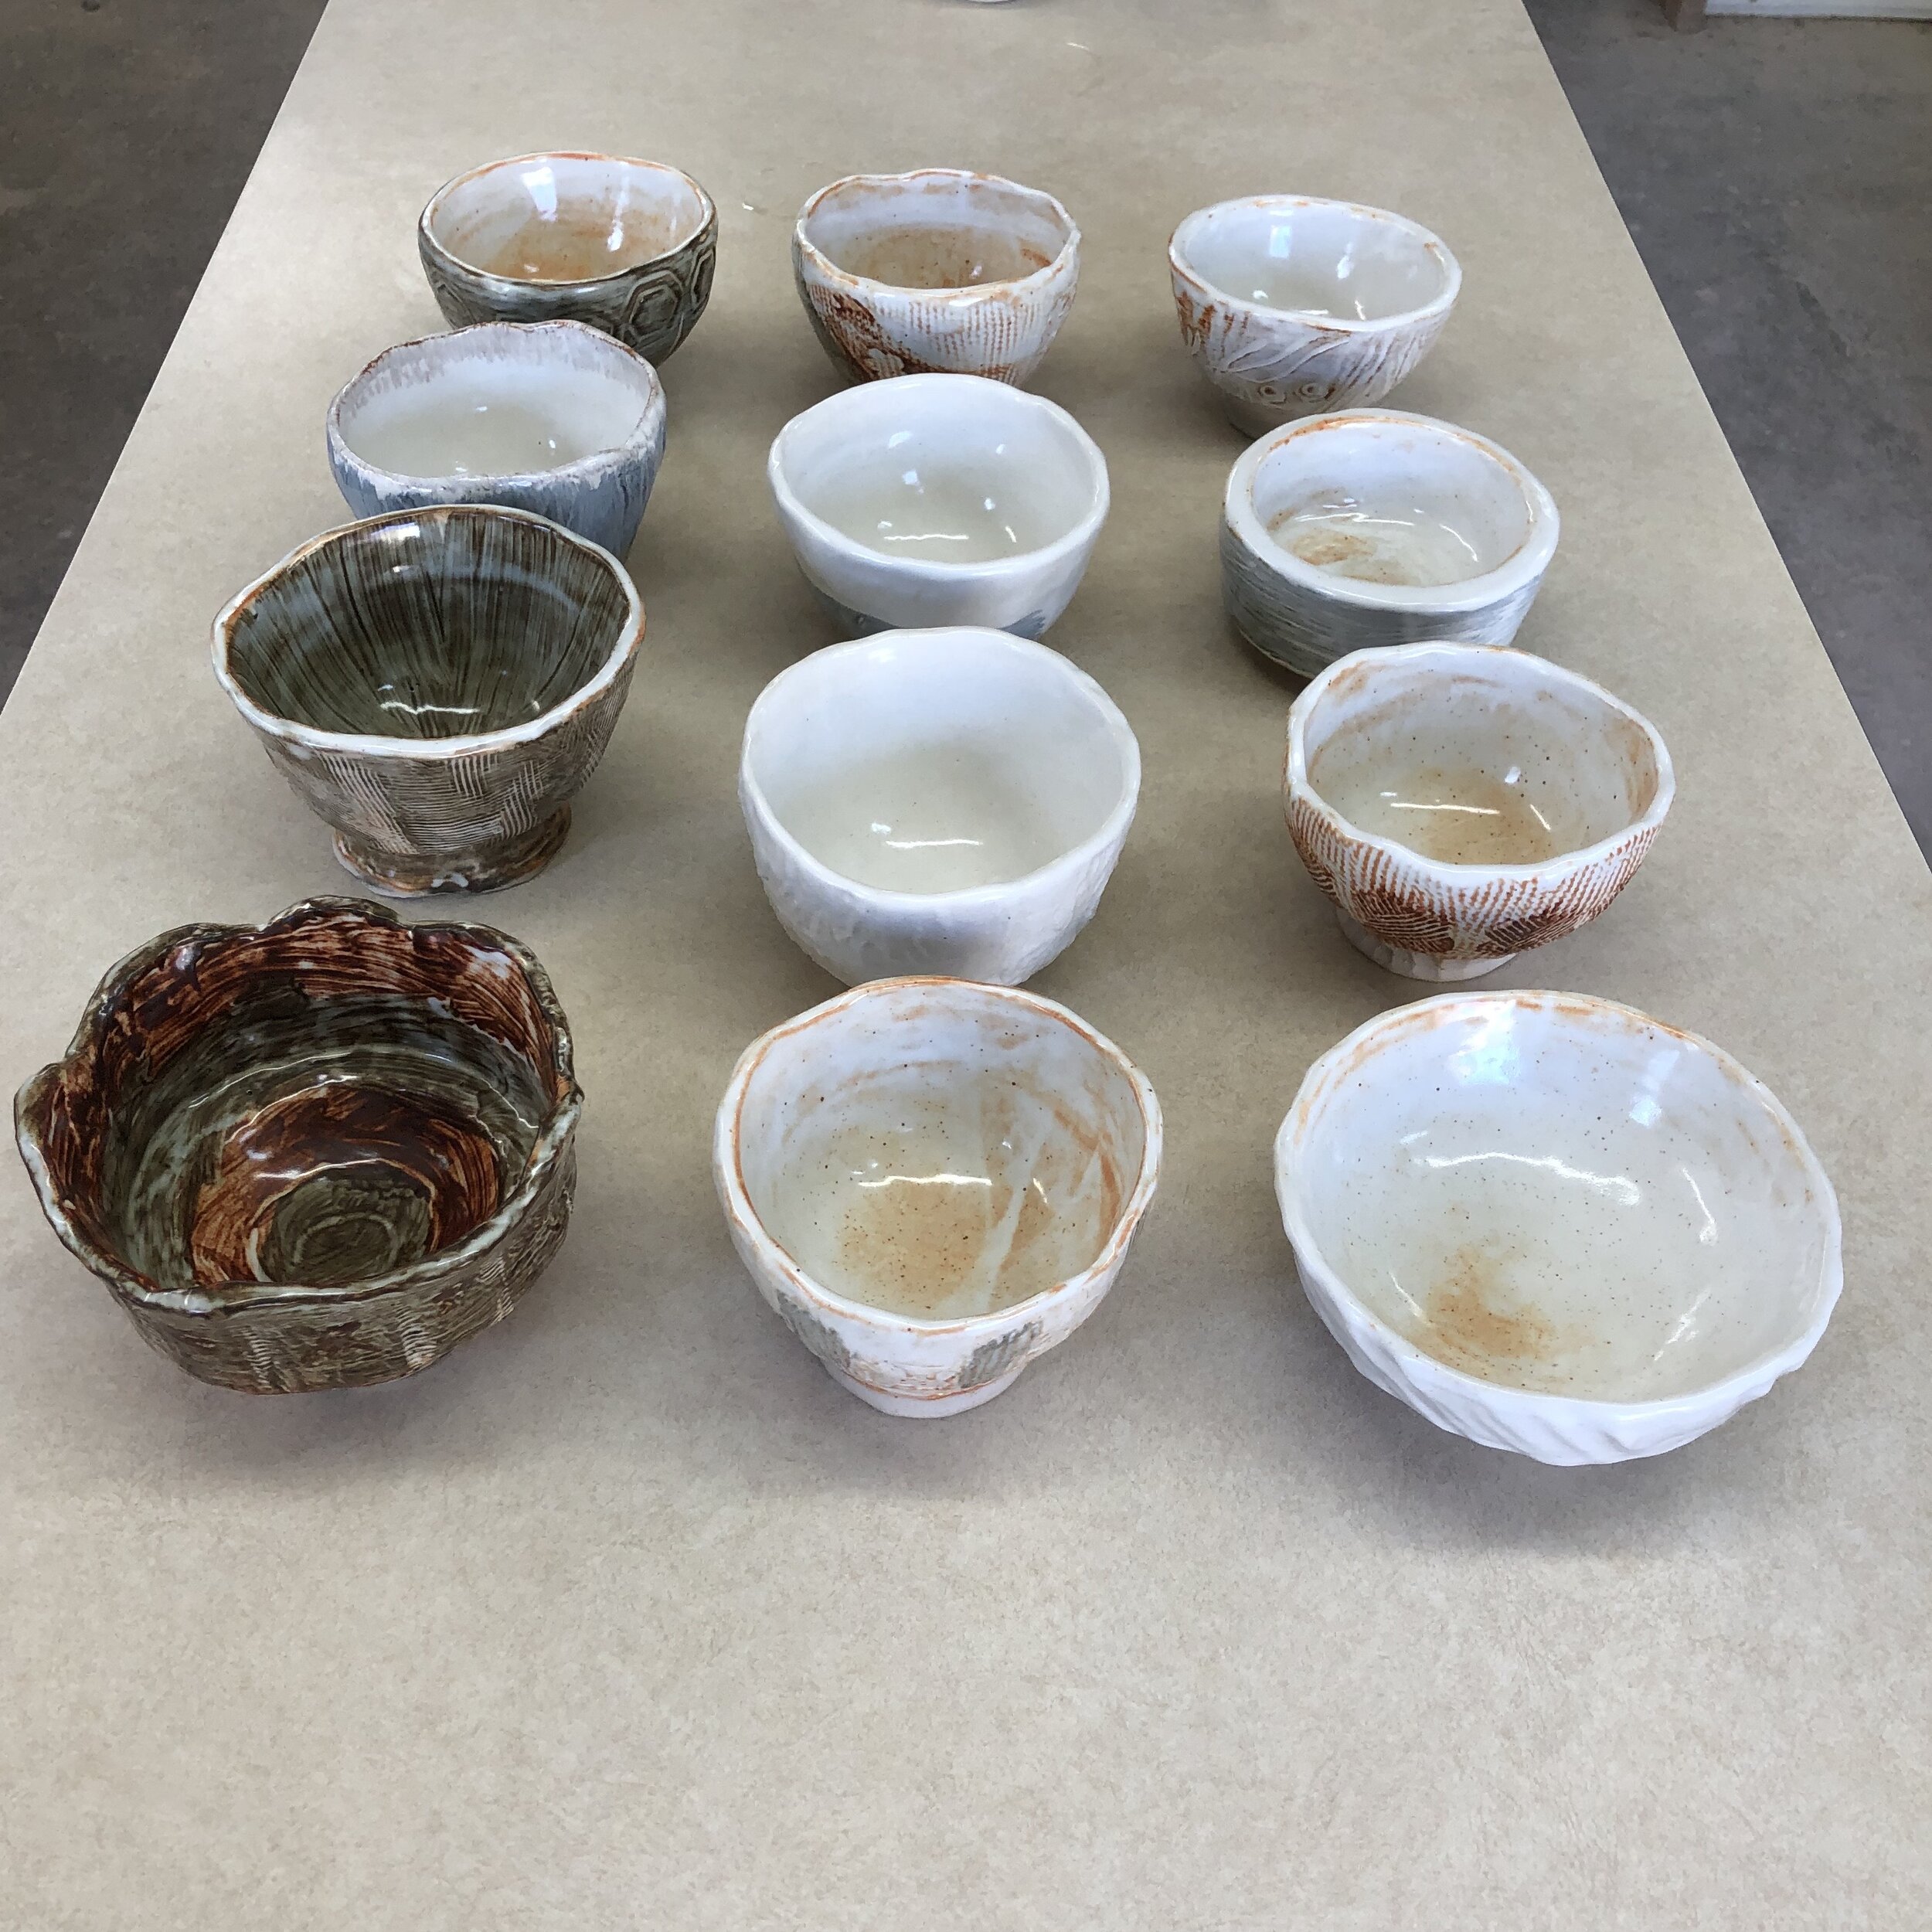 Student's finished tea bowls.